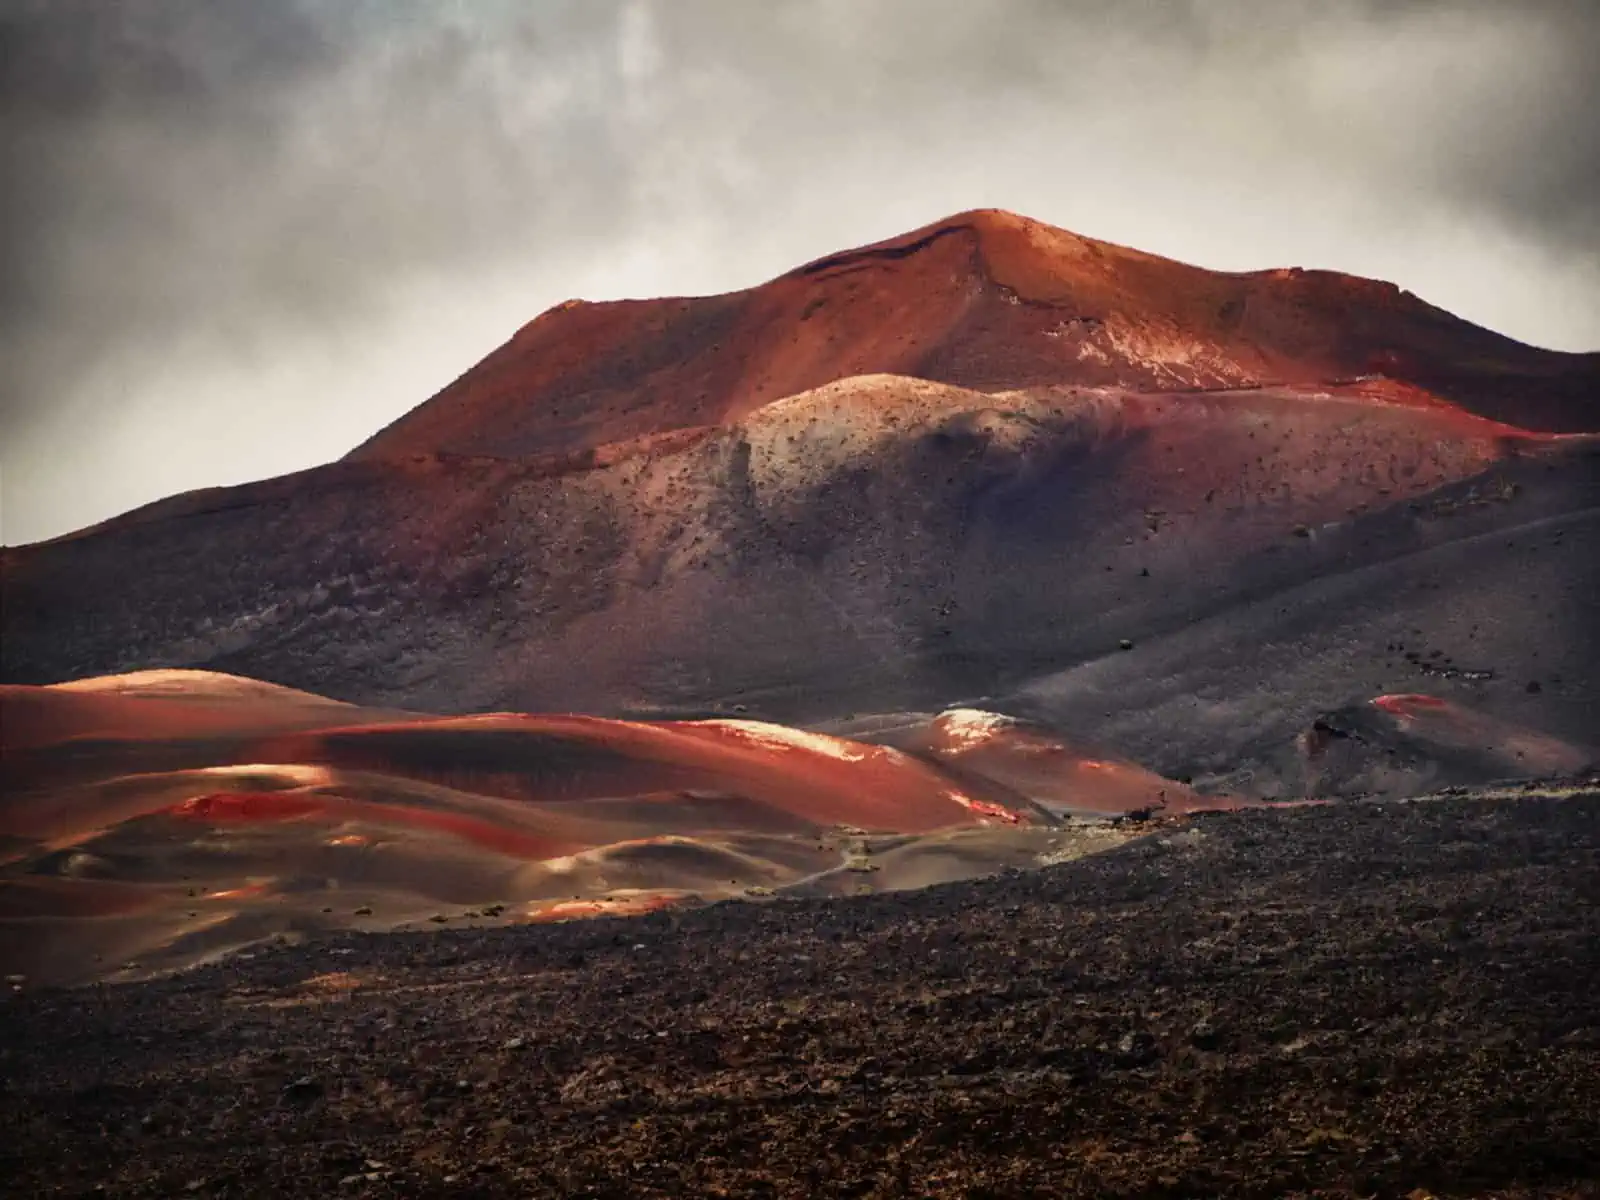 Image description: A landscape image which pictures a straight on shot of a volcano and its surrounding landscape. This image has browns, reds and yellows all throughout it showing soft curves of the volcano.